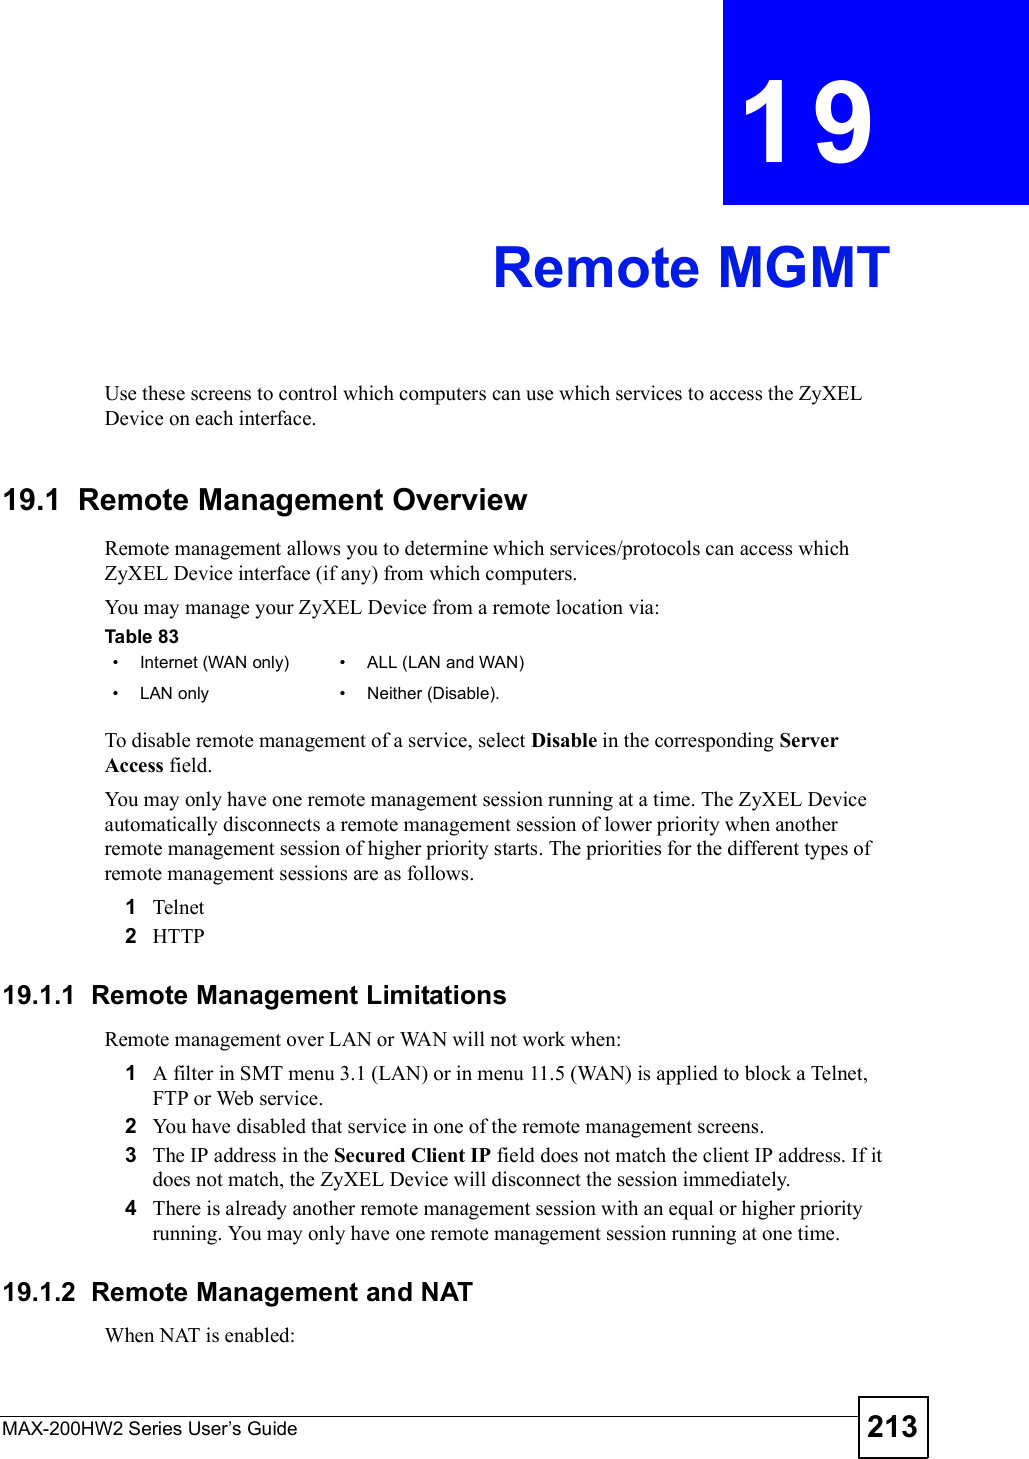 MAX-200HW2 Series User s Guide 213CHAPTER 19Remote MGMTUse these screens to control which computers can use which services to access the ZyXEL Device on each interface.19.1  Remote Management OverviewRemote management allows you to determine which services/protocols can access which ZyXEL Device interface (if any) from which computers.You may manage your ZyXEL Device from a remote location via:To disable remote management of a service, select Disable in the corresponding Server Access field.You may only have one remote management session running at a time. The ZyXEL Device automatically disconnects a remote management session of lower priority when another remote management session of higher priority starts. The priorities for the different types of remote management sessions are as follows.1Telnet2HTTP19.1.1  Remote Management LimitationsRemote management over LAN or WAN will not work when:1A filter in SMT menu 3.1 (LAN) or in menu 11.5 (WAN) is applied to block a Telnet, FTP or Web service. 2You have disabled that service in one of the remote management screens.3The IP address in the Secured Client IP field does not match the client IP address. If it does not match, the ZyXEL Device will disconnect the session immediately.4There is already another remote management session with an equal or higher priority running. You may only have one remote management session running at one time.19.1.2  Remote Management and NATWhen NAT is enabled:Table 83   #Internet (WAN only) #ALL (LAN and WAN)#LAN only #Neither (Disable).